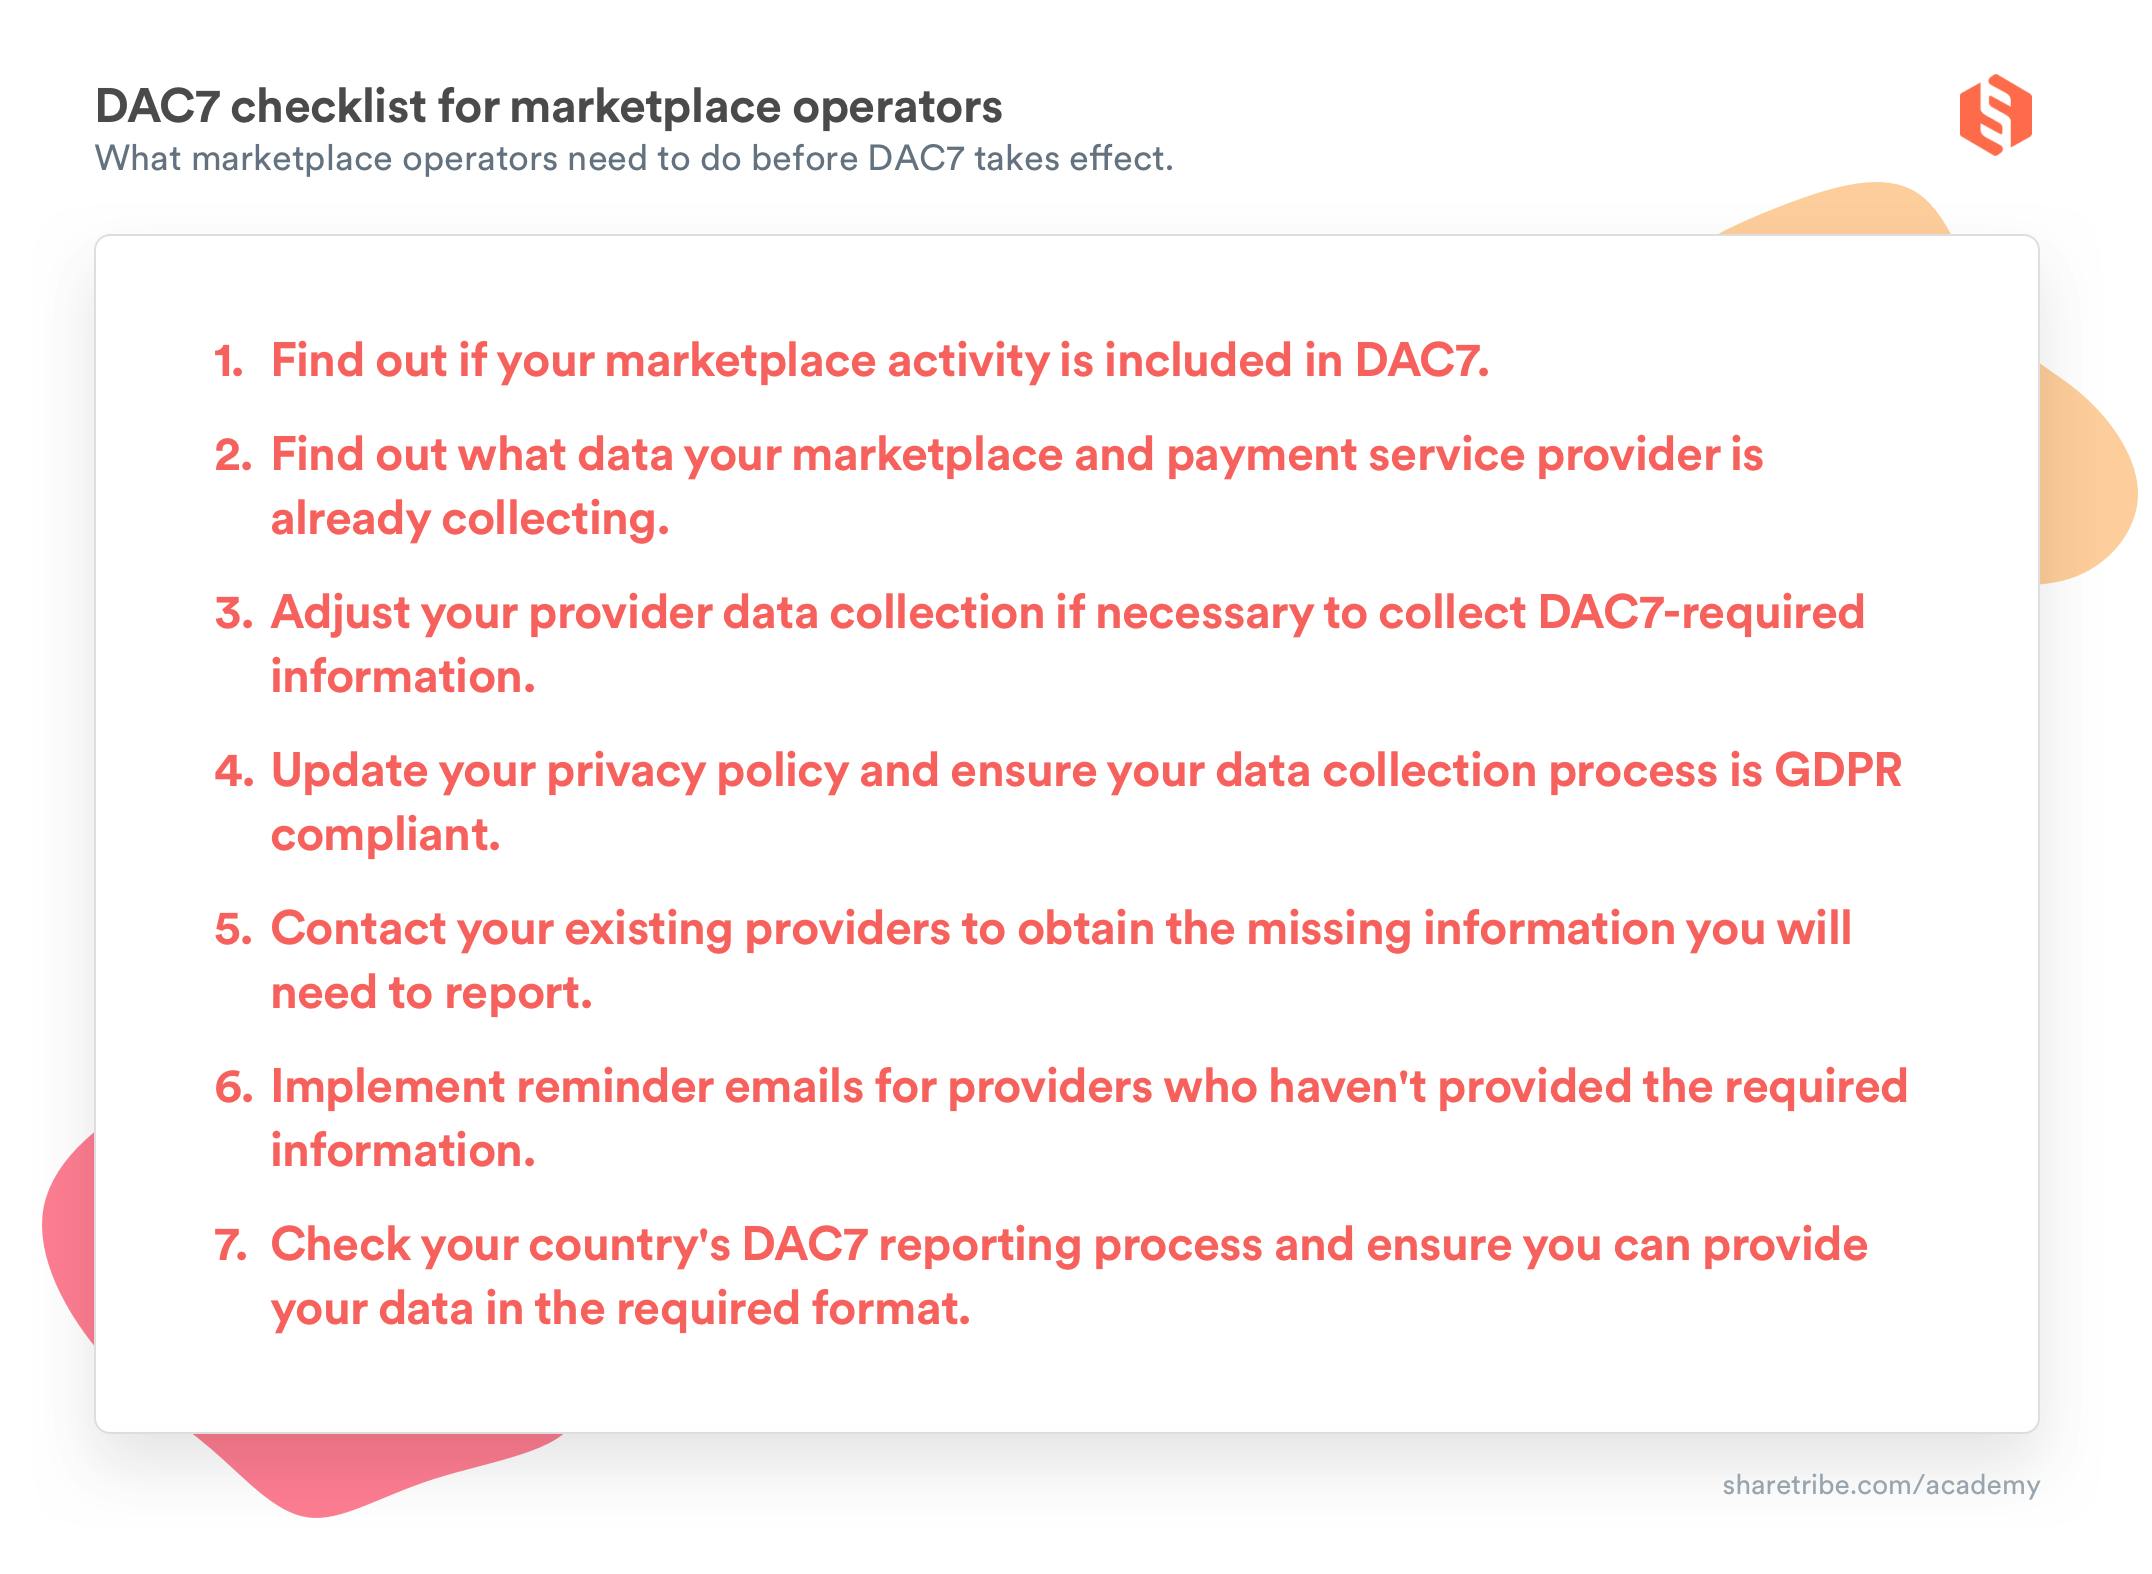 DAC7 checklist for marketplace operators: What marketplace operators need to do before DAC7 takes effect. 1. Find out if your marketplace activity is included in DAC7. 2. Find out what data your marketplace and payment service provider is already collecting. 3. Adjust your provider data collection if necessary to collect DAC7-required information. 4. Update your privacy policy and ensure your data collection process is GDPR compliant. 5. Contact your existing providers to obtain the missing information you will need to report. 6. Implement reminder emails for providers who haven't provided the required information. 7. Check your country's DAC7 reporting process and ensure you can provide your data in the required format.